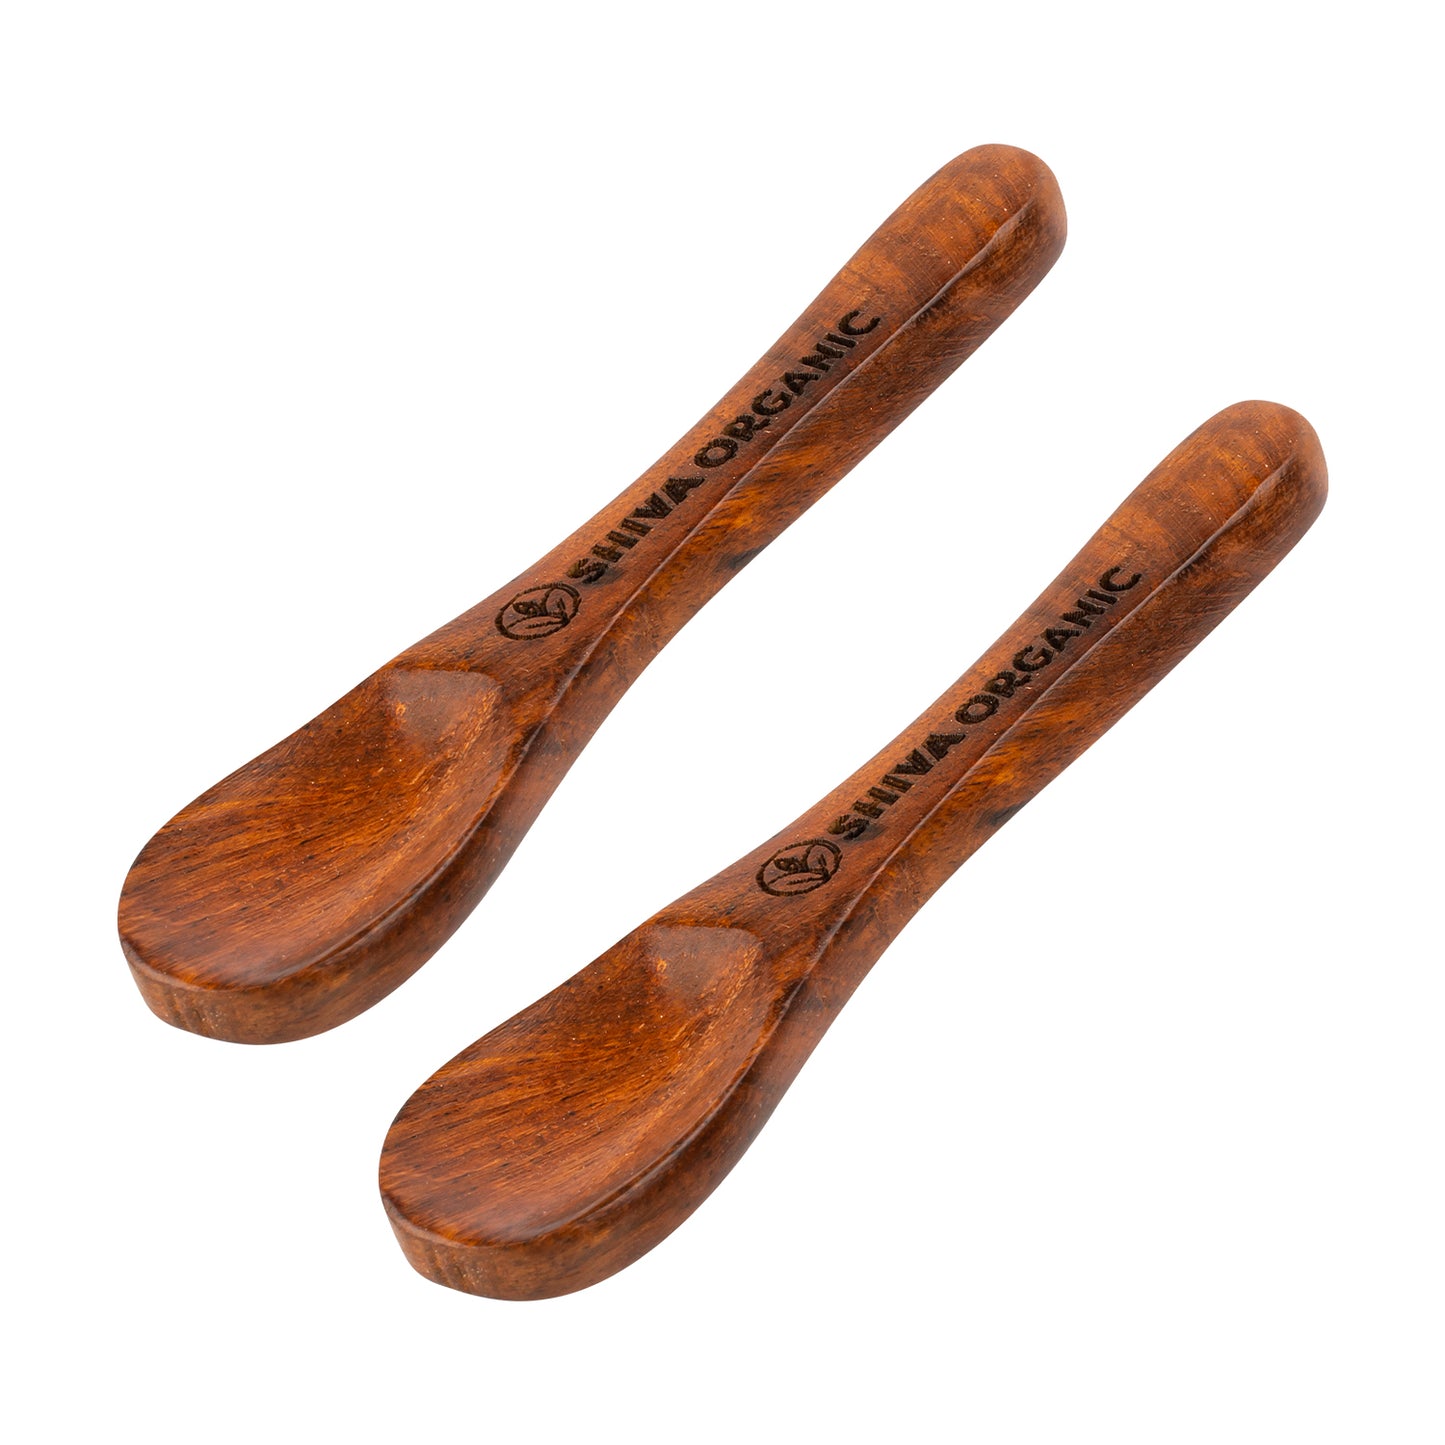 Handmade wooden spoon for spices